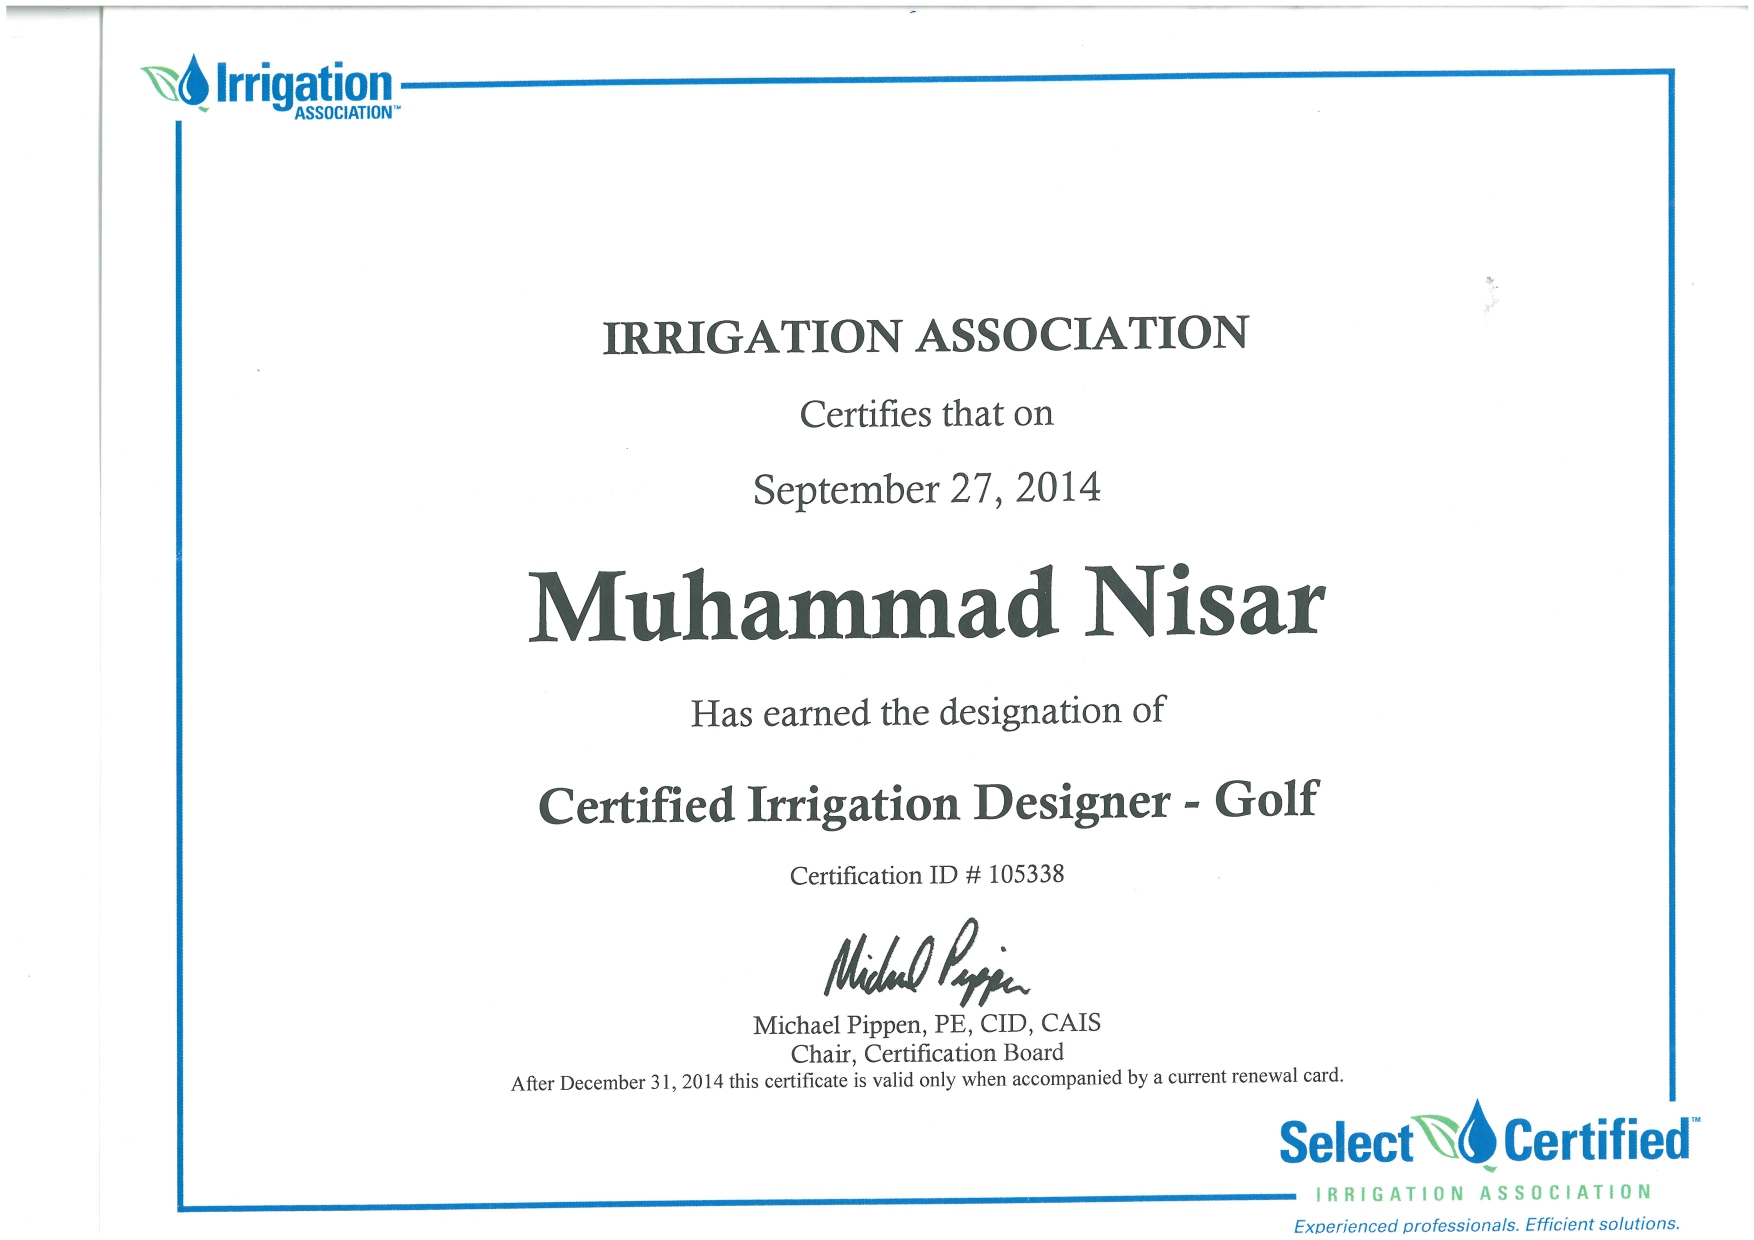 “Irrigation

ASSOCIATION”

 

IRRIGATION ASSOCIATION

Certifies that on

September 27, 2014

Muhammad Nisar

Has earned the designation of

Certified Irrigation Designer - Golf
Certification 1D # 105338
Wiel Fp.
Michael Pippen, PE, CID, CAIS

Chair, Certification Board
After December 31, 2014 this certificate is valid only when accompanied by a current renewal card.

Select® Certified